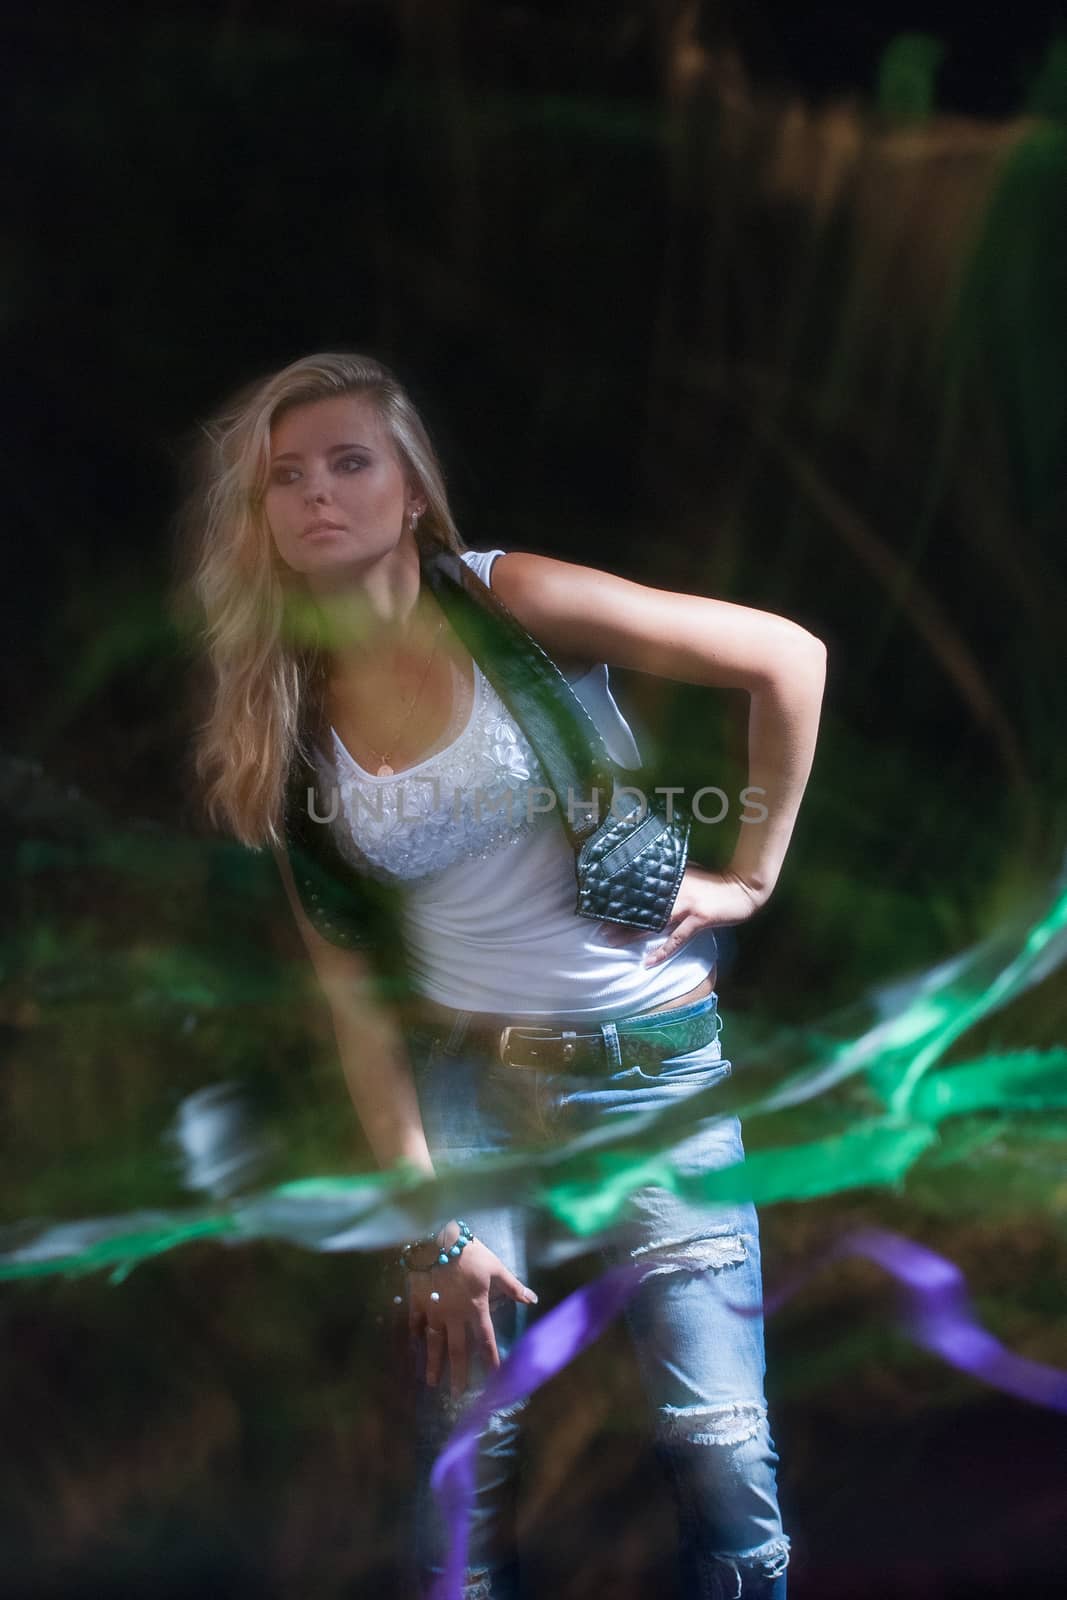 young, blonde girl in jeans clothes on a dark background by Andreua